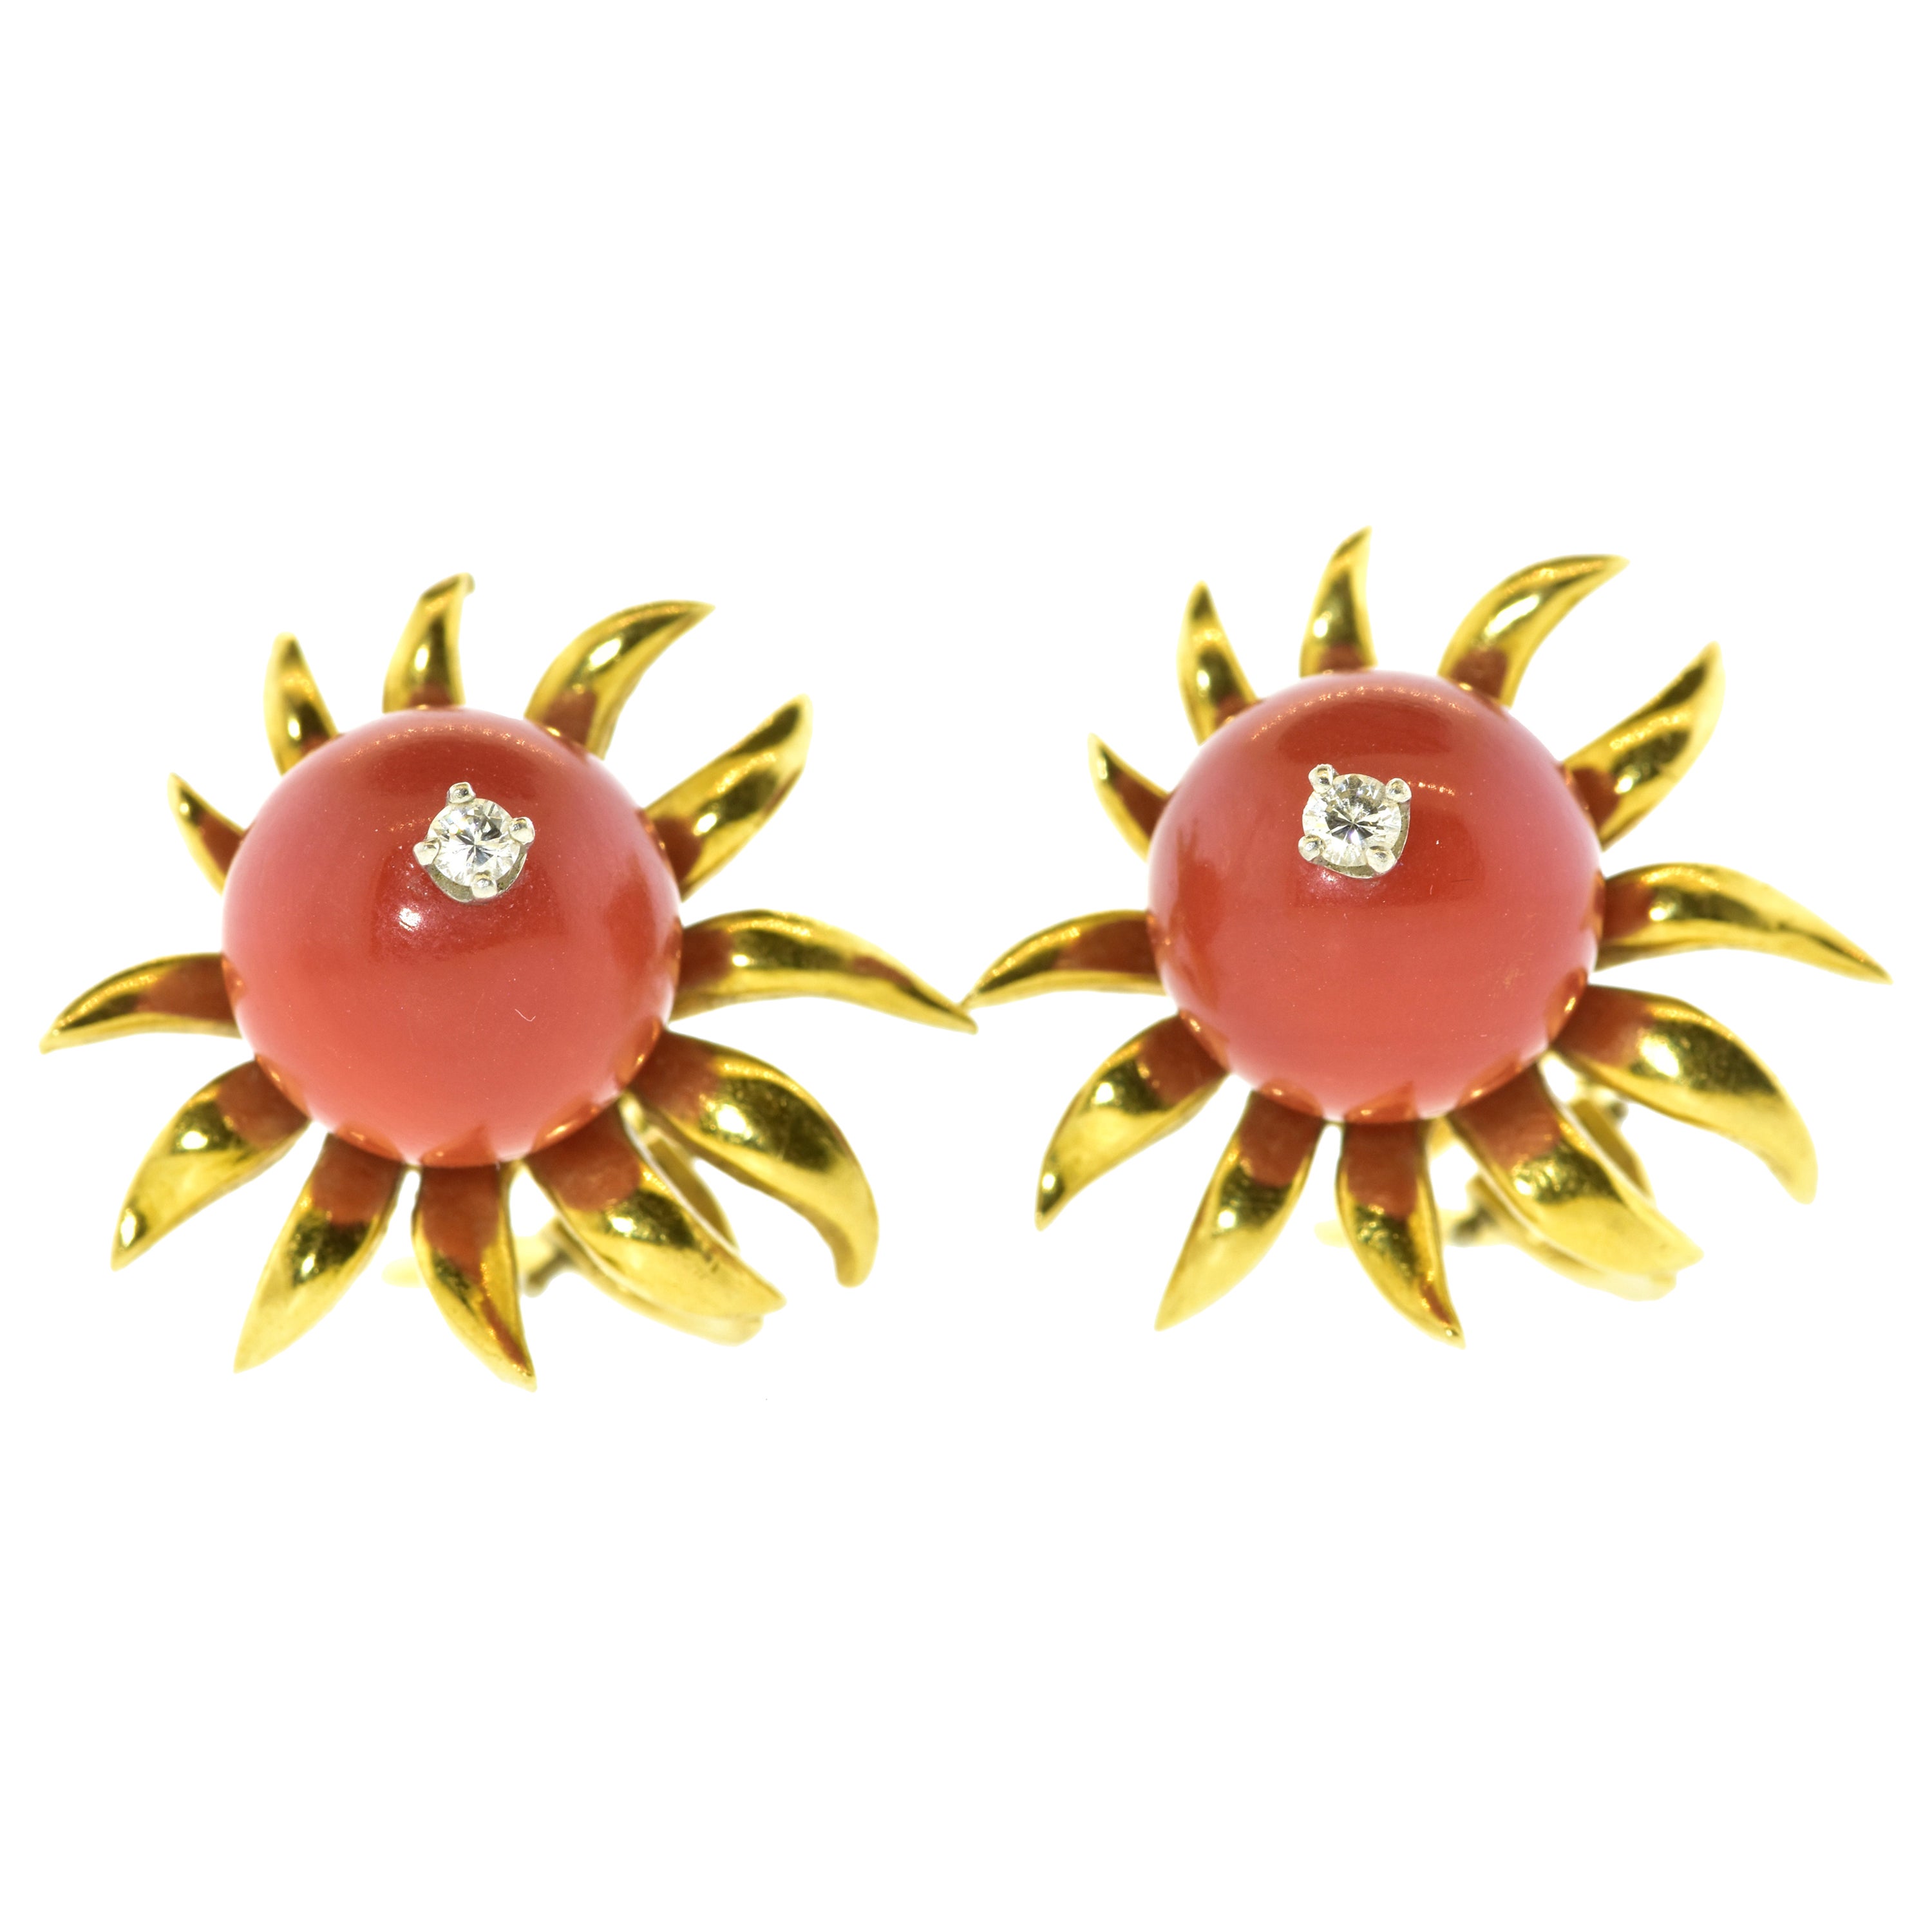 Jean Schlumberger 18K Gold, Diamond and Coral unusual Earrings, circa 1960.